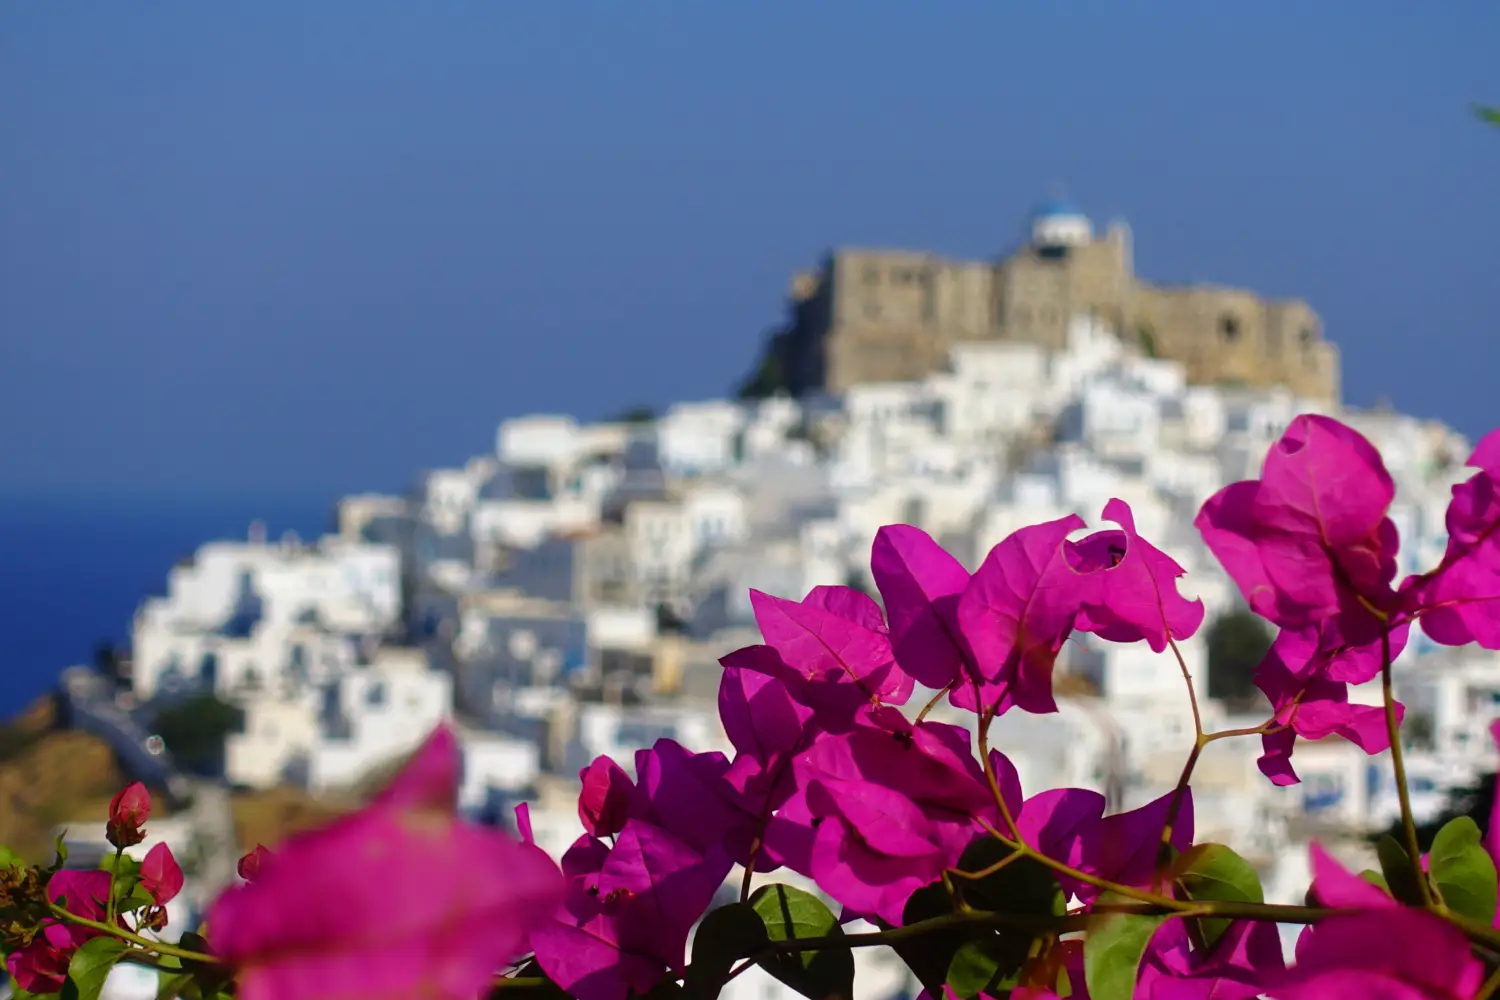 Ferry to Astypalaia - Picturesque castle of Astypalaia island as seen through beautiful bougainvillea in blossom, Dodecanese, Greece.